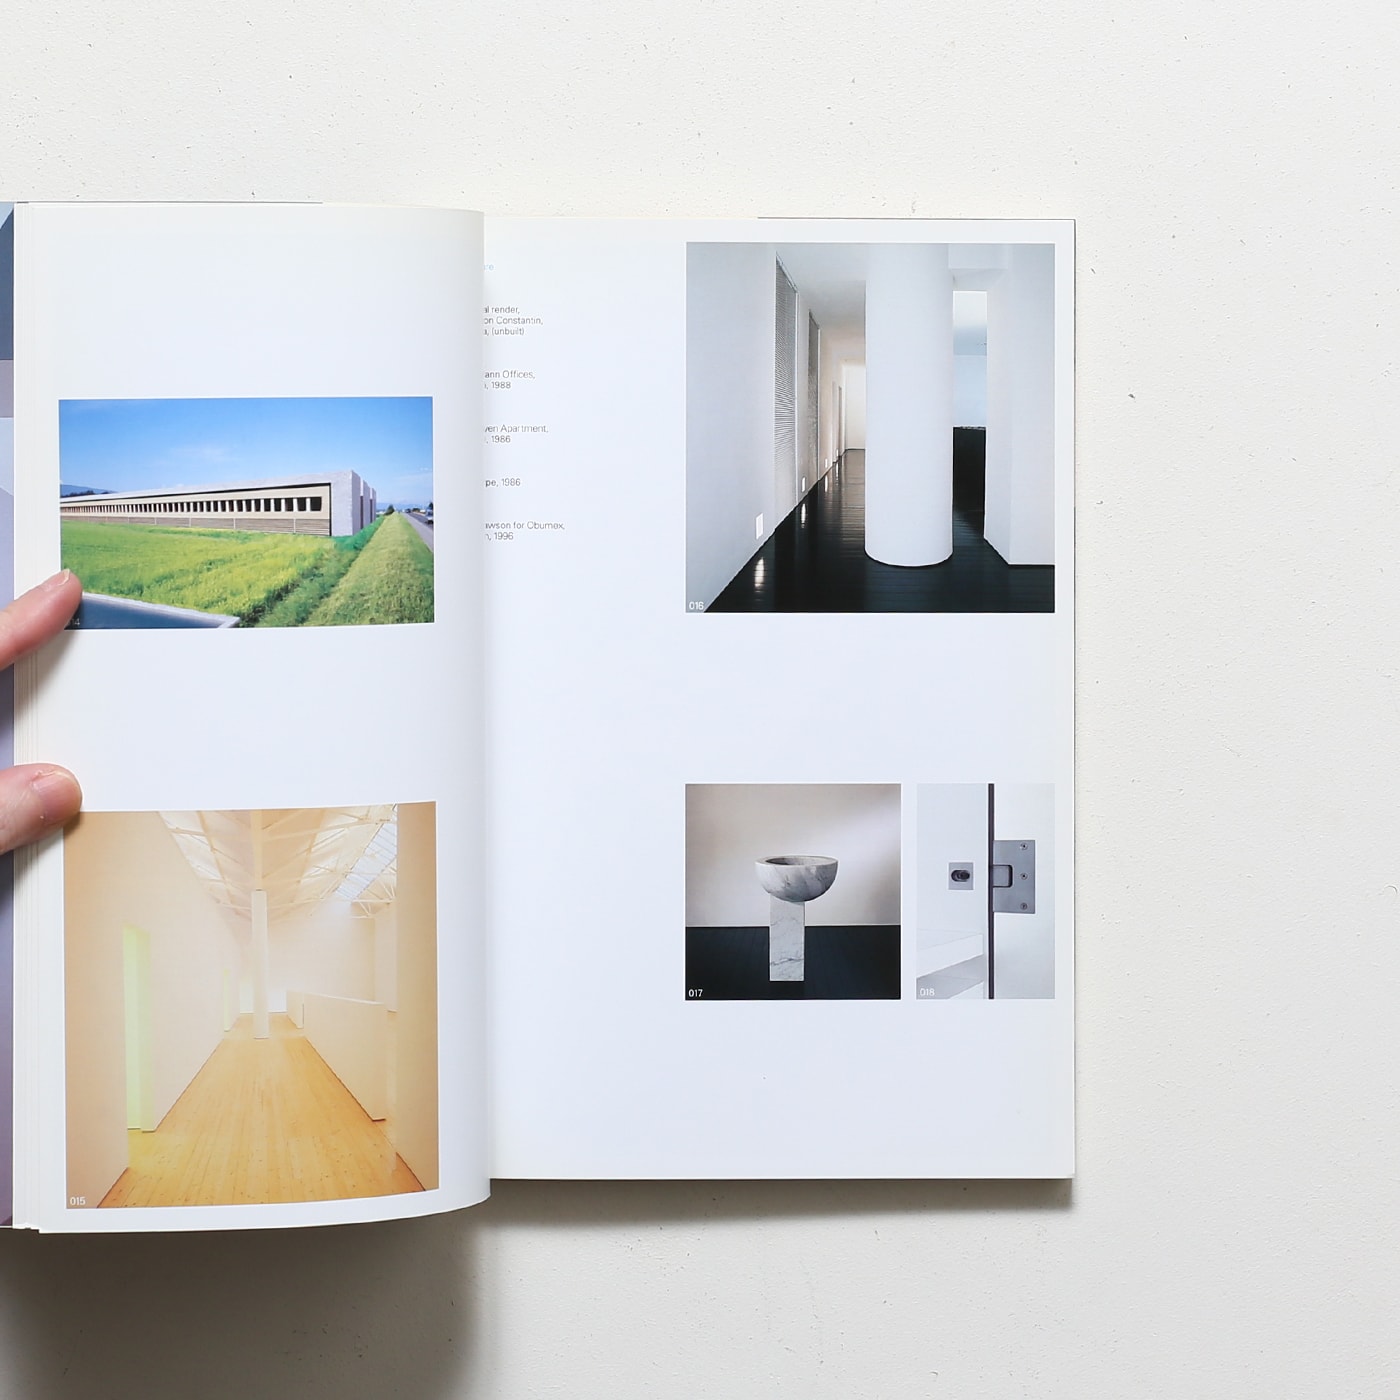 John Pawson: Themes and Projects